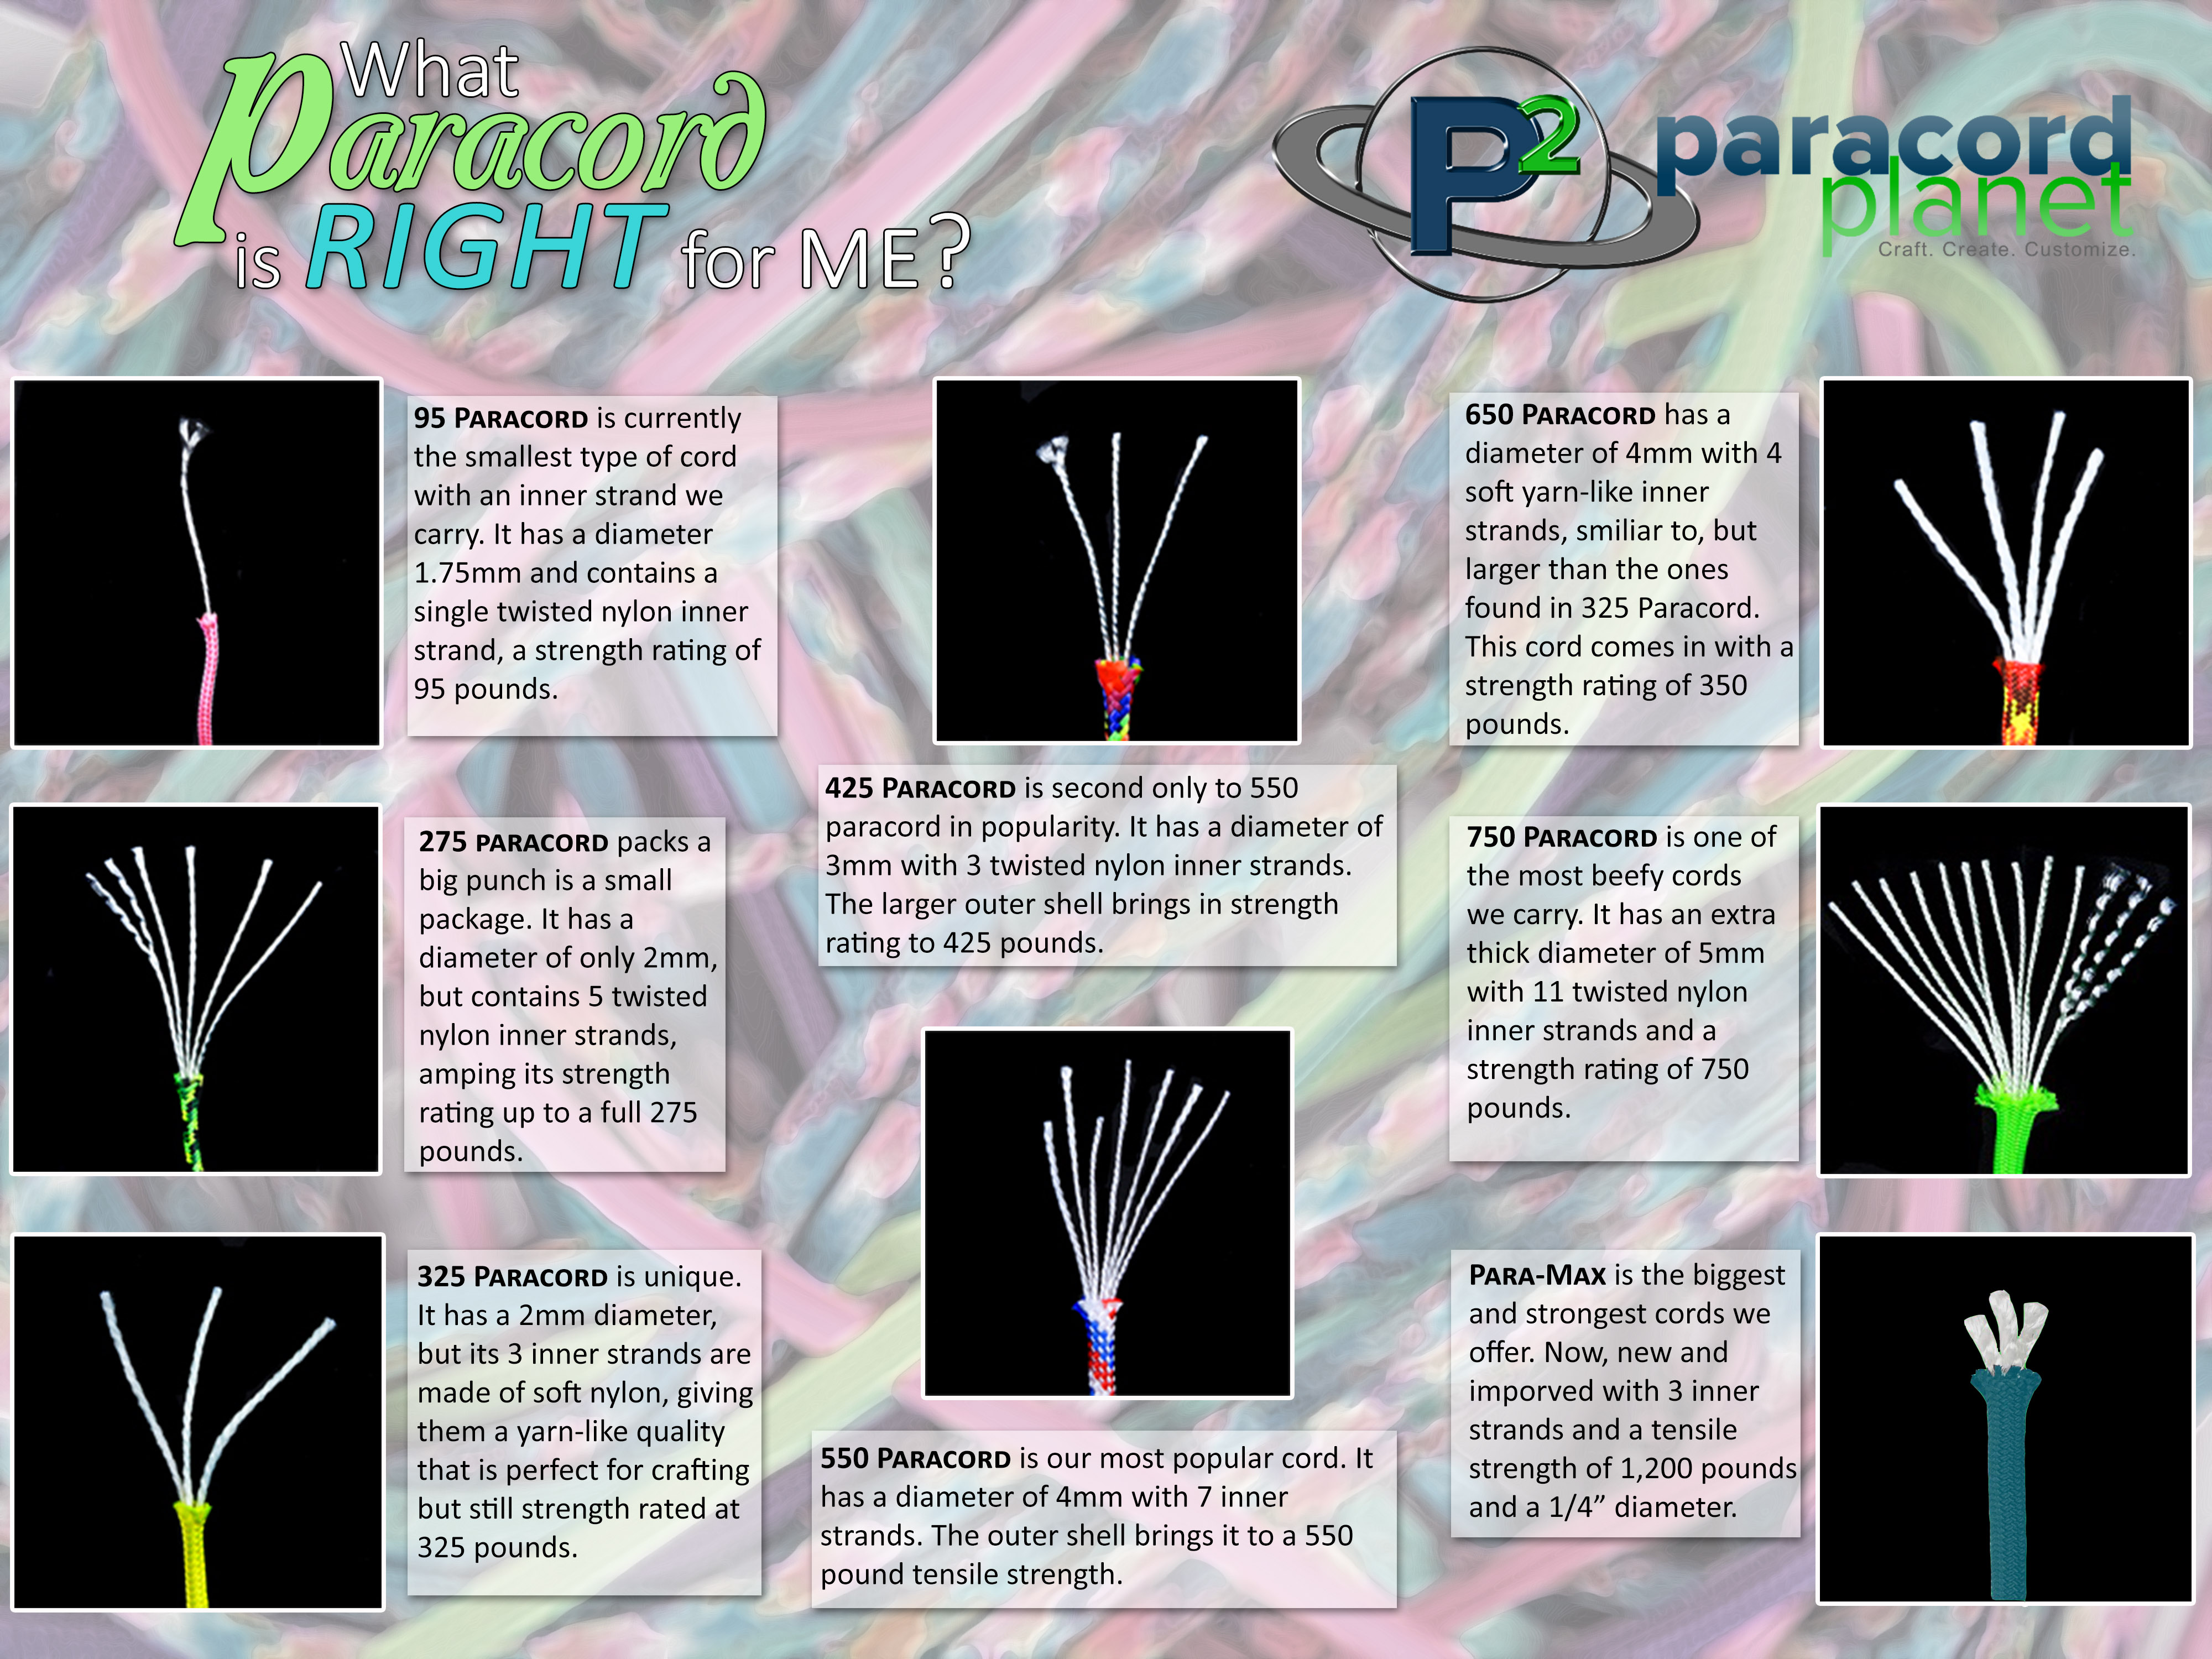 What Paracord is Right for Me